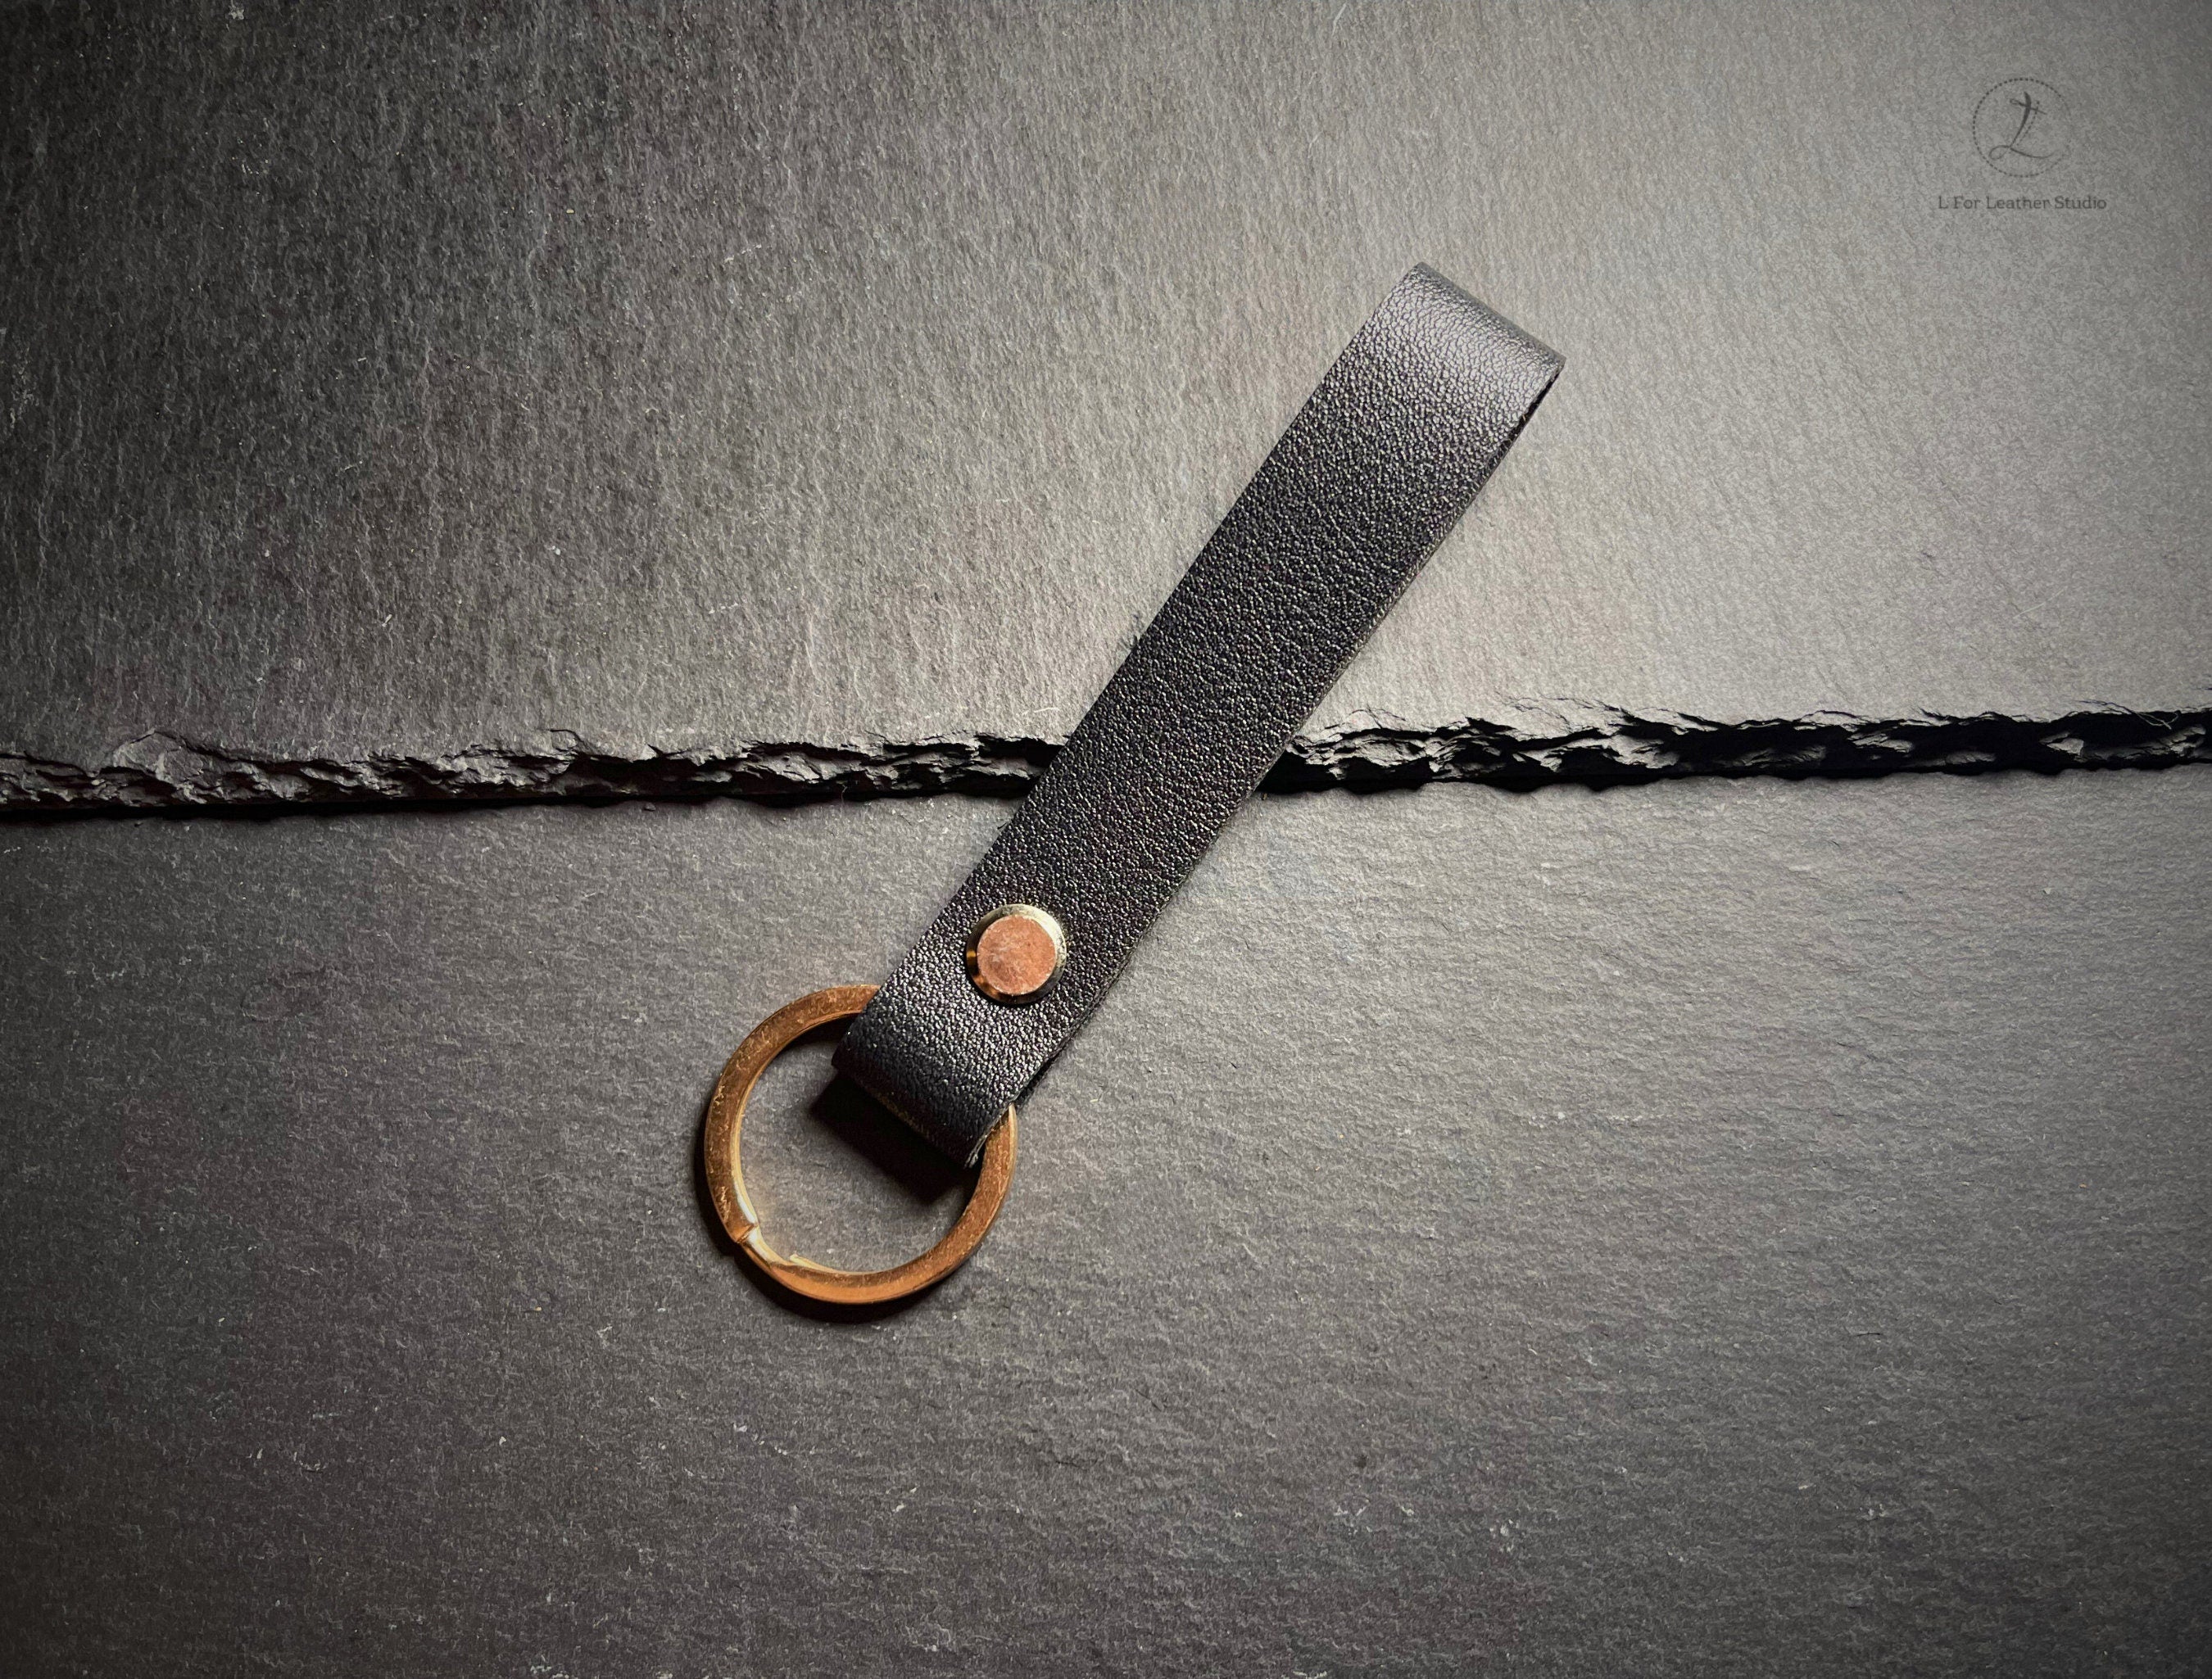 Vegan Leather Keychains, Animal-Free, Minimalistic Style, Birthday Anniversary Gift, EDC, For Him/Her, Keychains for bags, Key rings